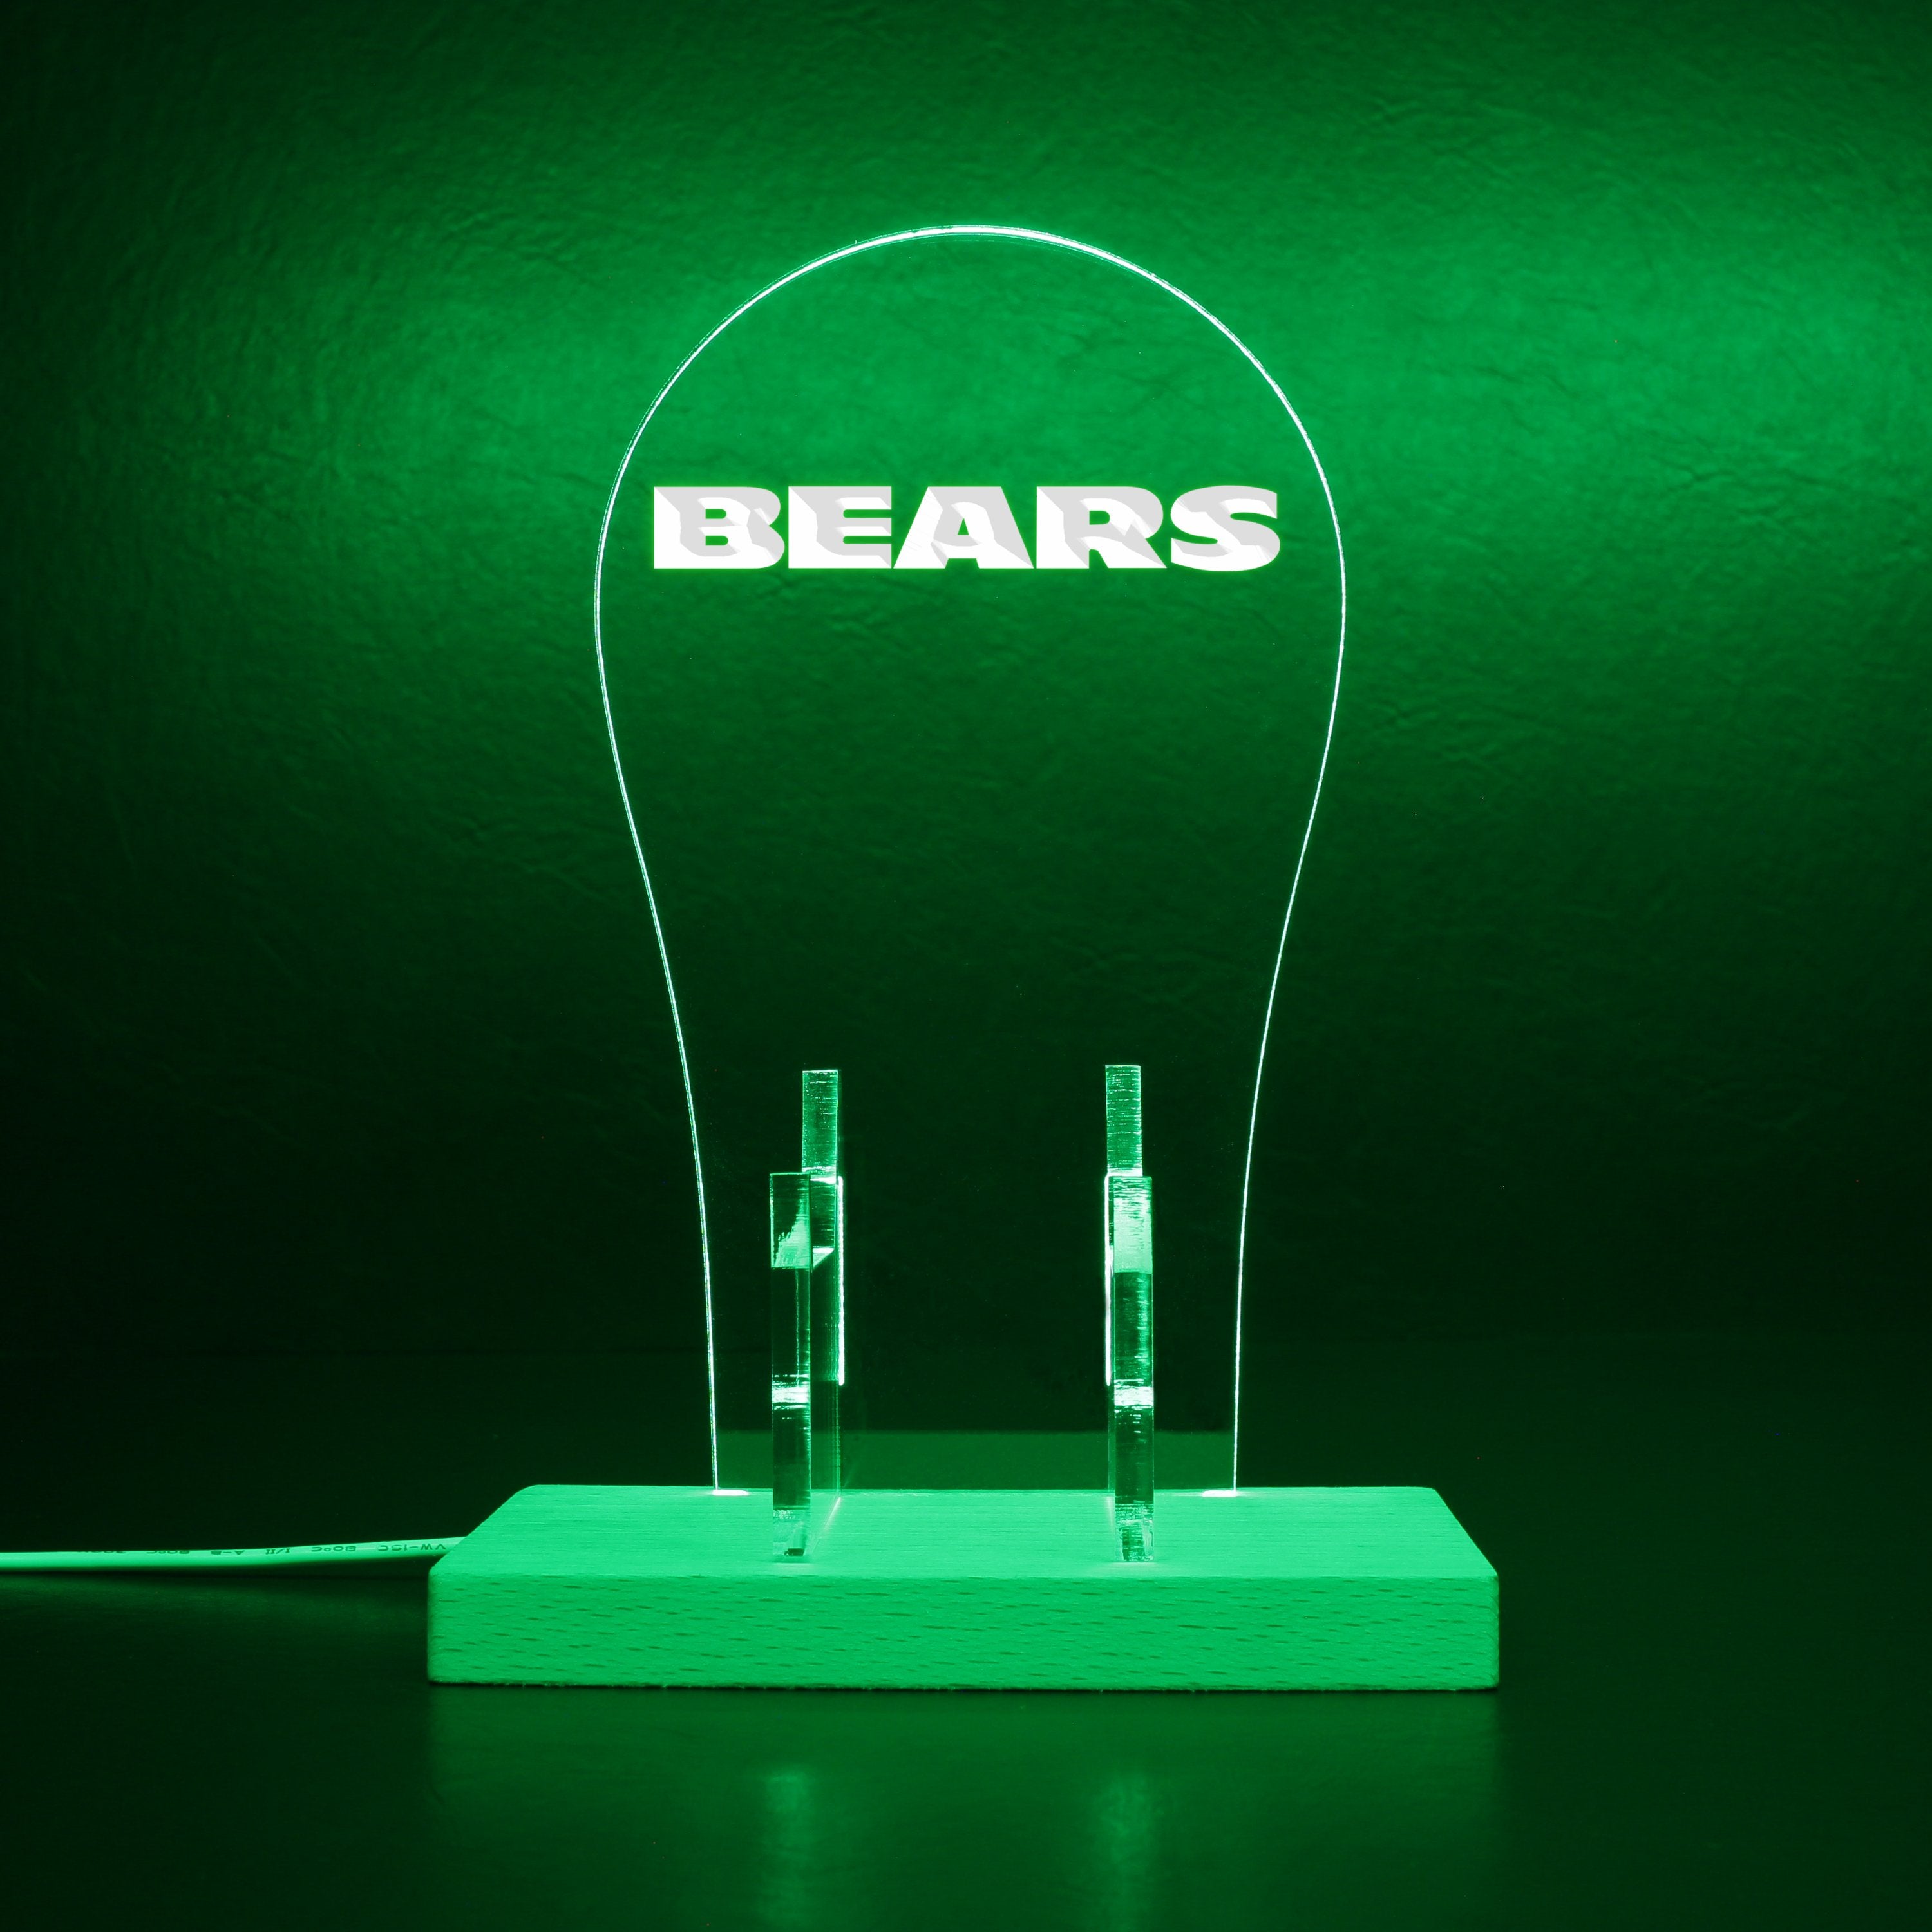 Chicago Bears script logo in use since 1974 RGB LED Gaming Headset Controller Stand